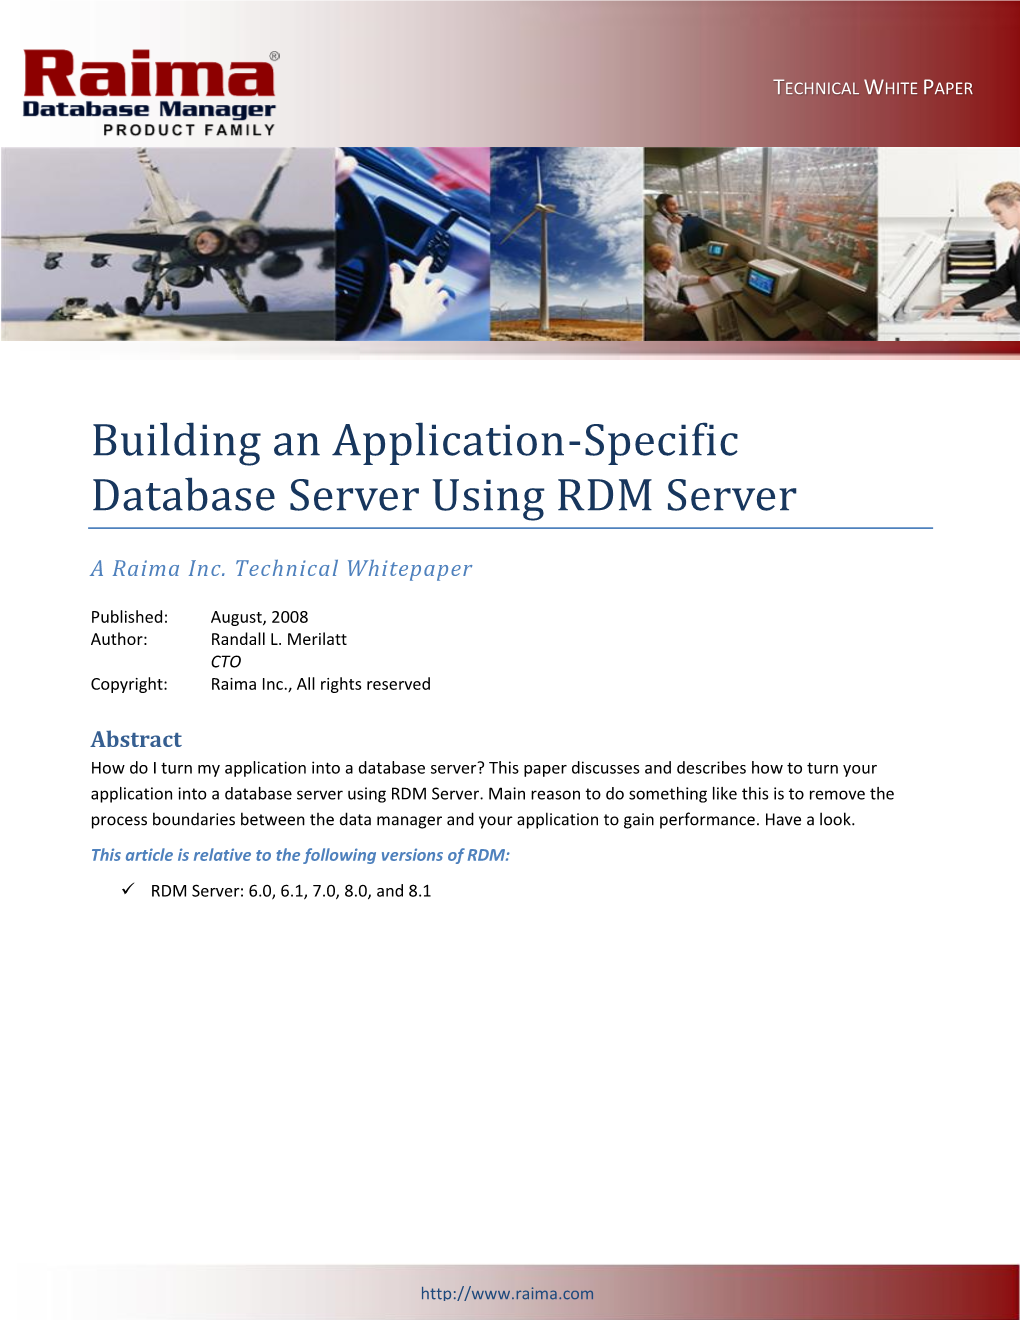 Building an Application-Specific Database Server Using RDM Server